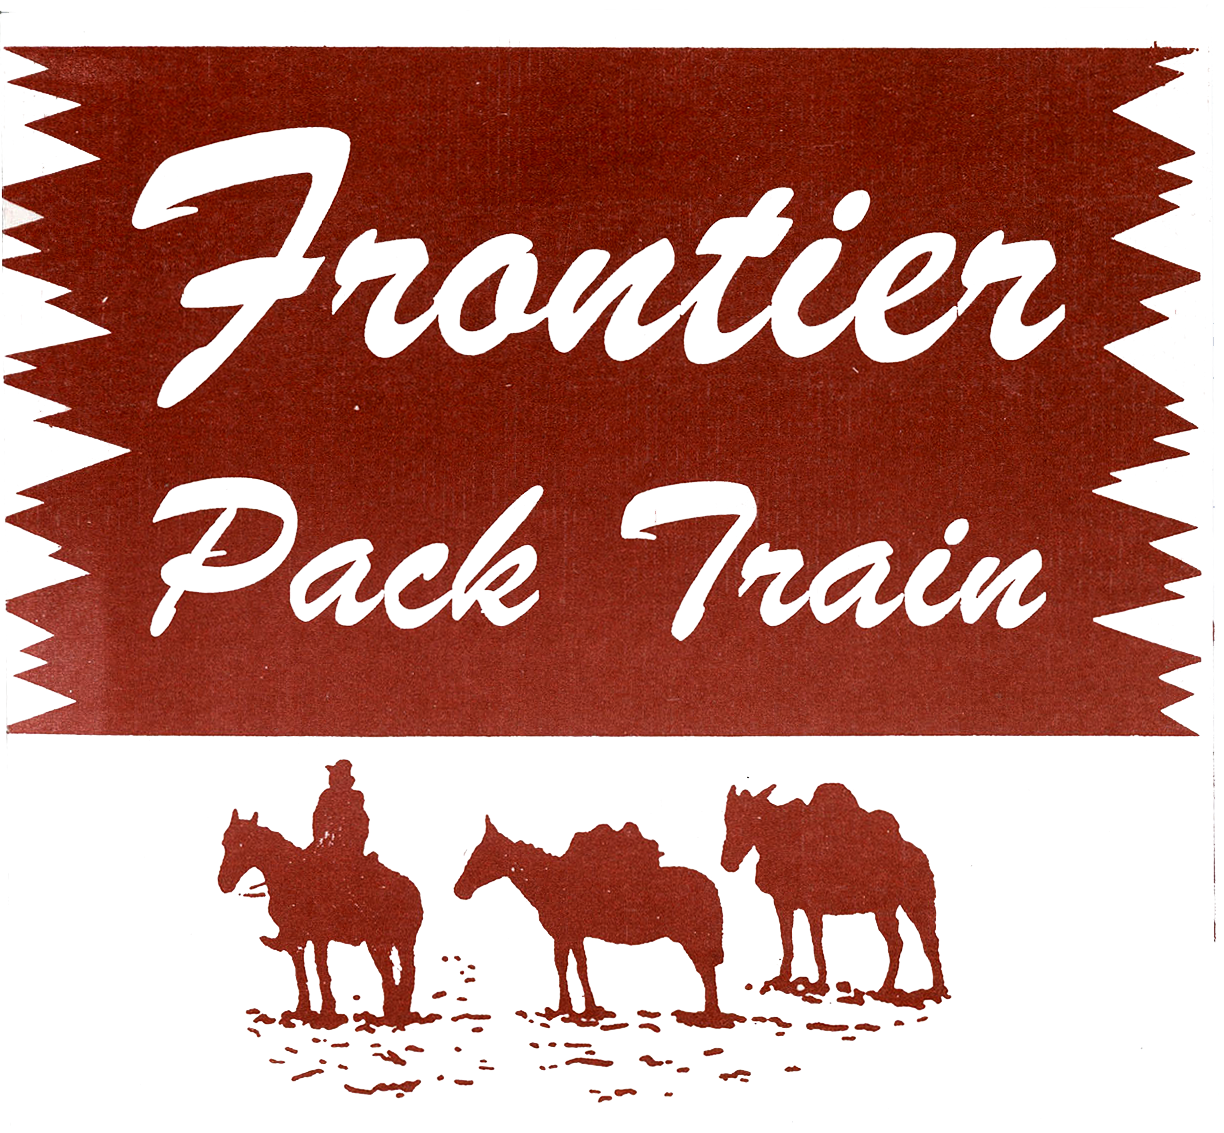 frontier pack trains